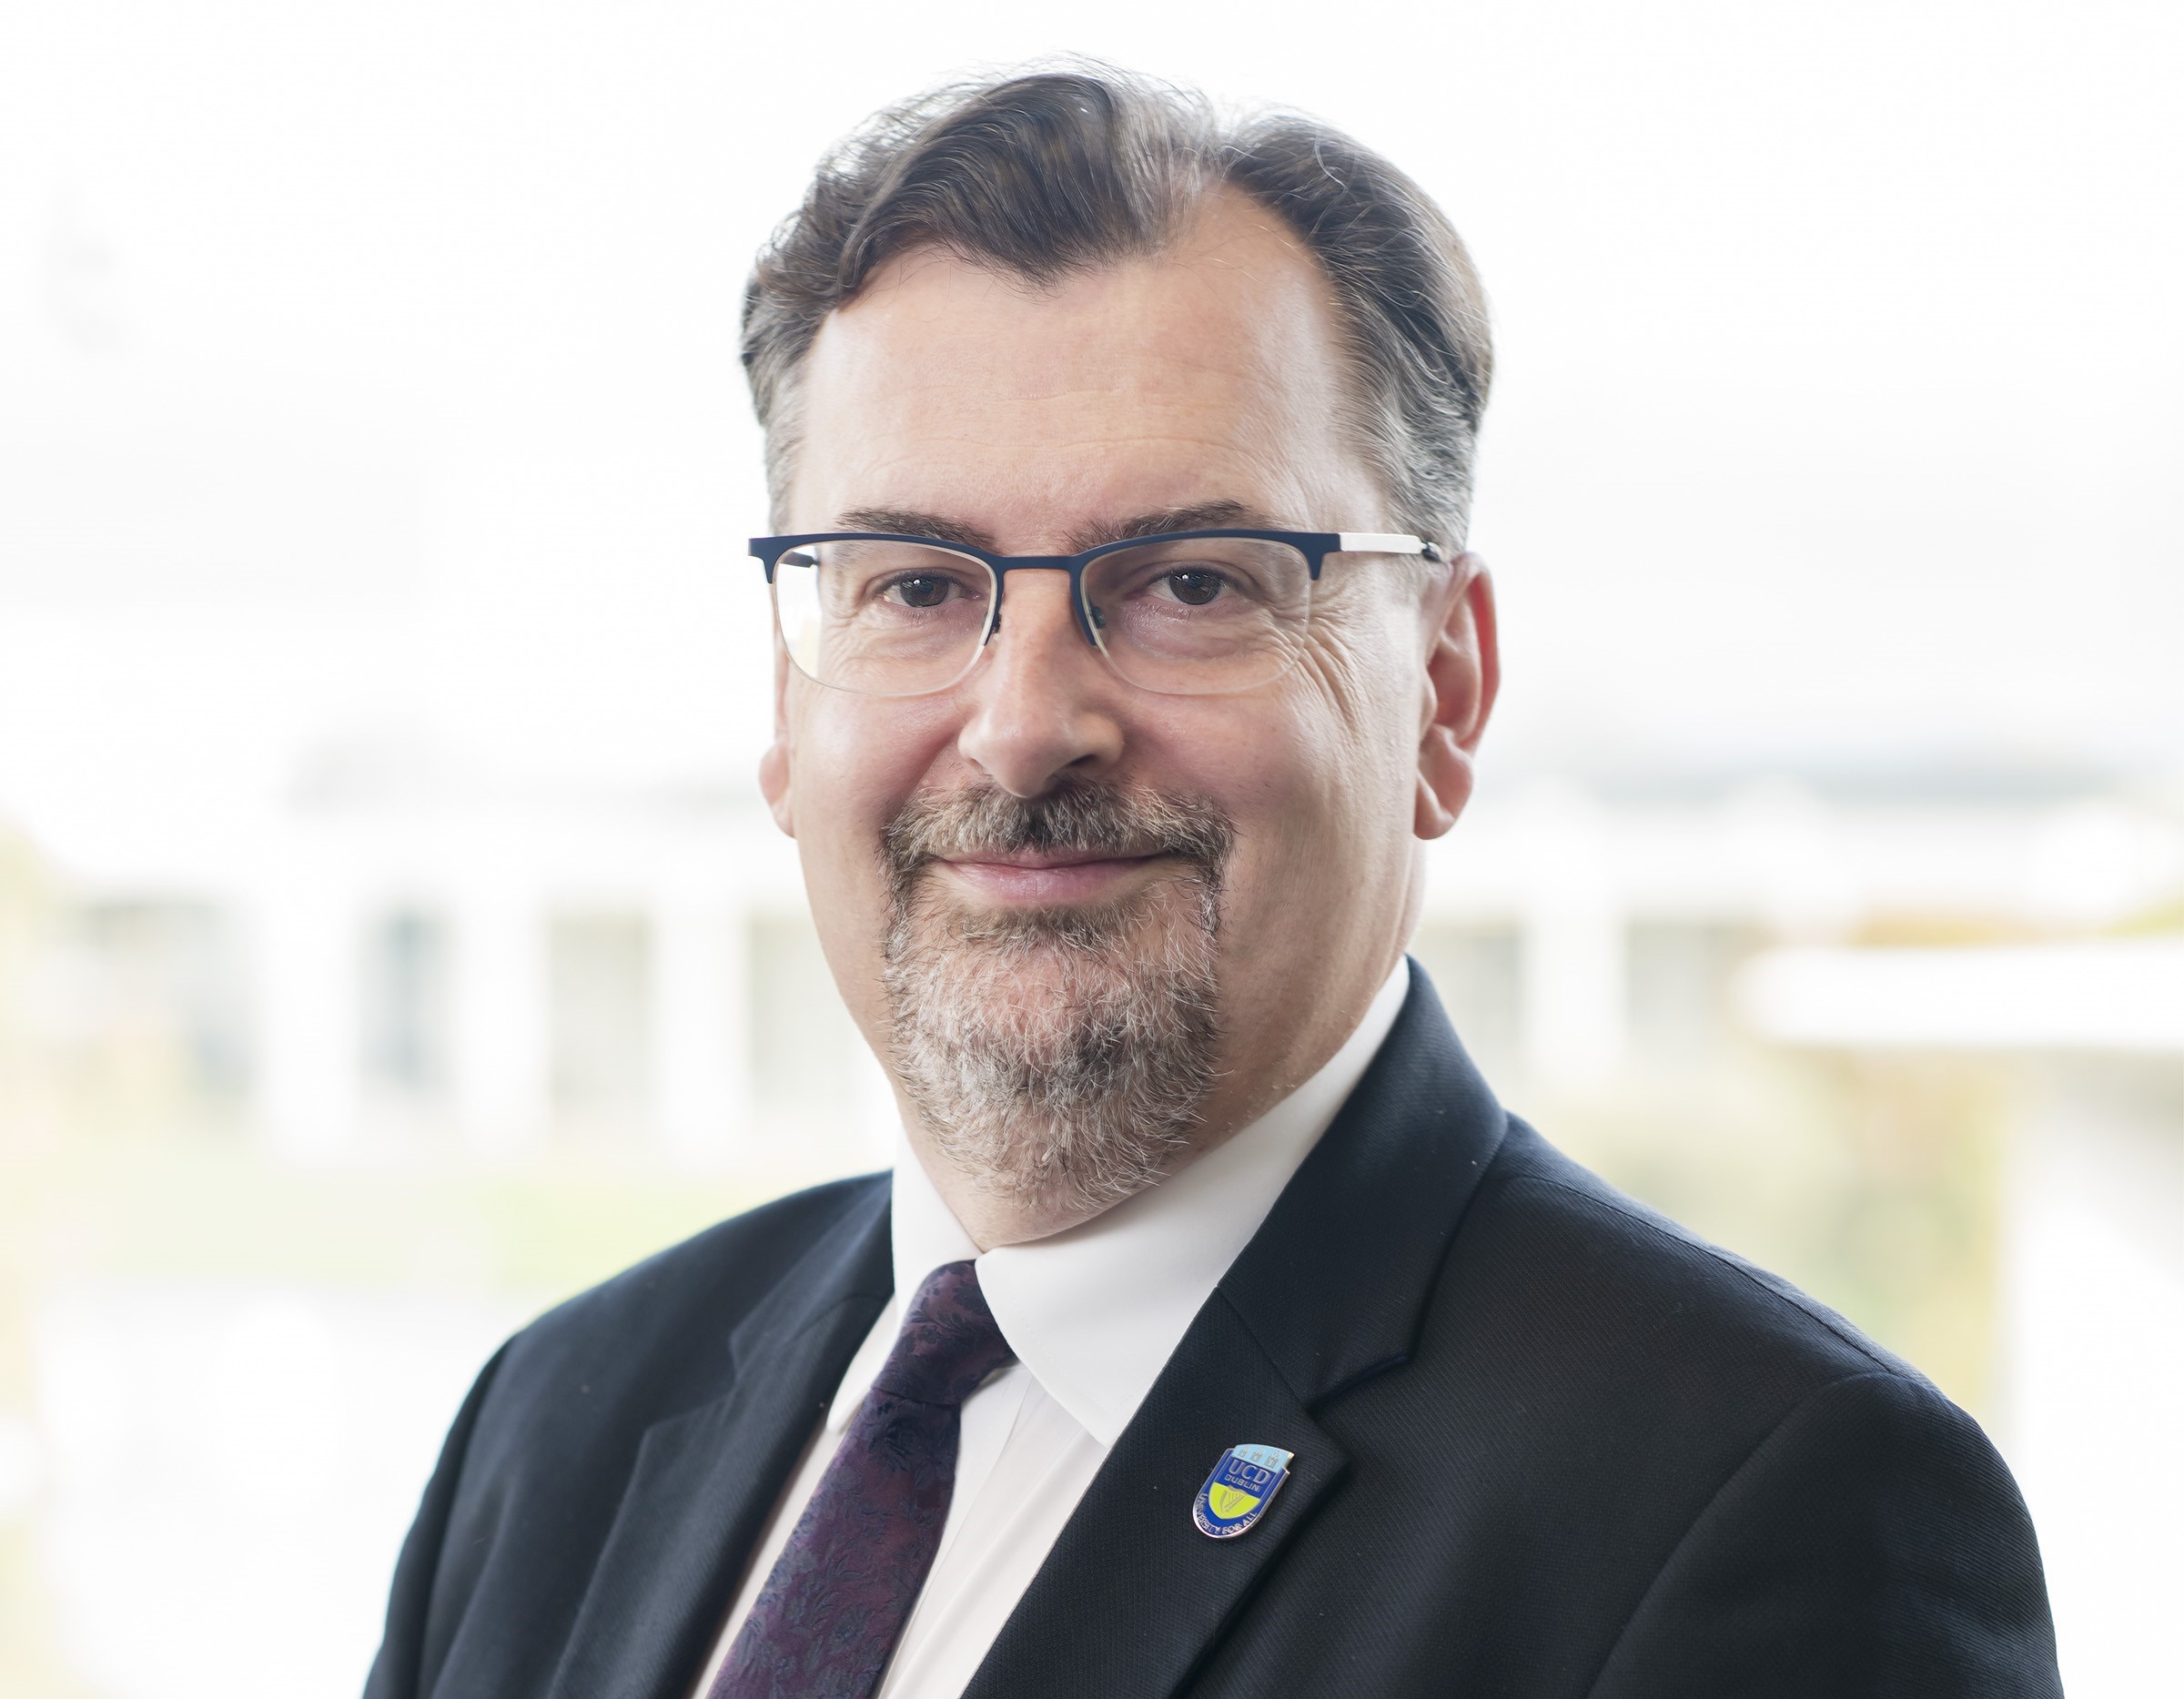 Professor Colin Scott, Principal of UCD College of Social Sciences and Law, appointed as Registrar and Deputy President of UCD